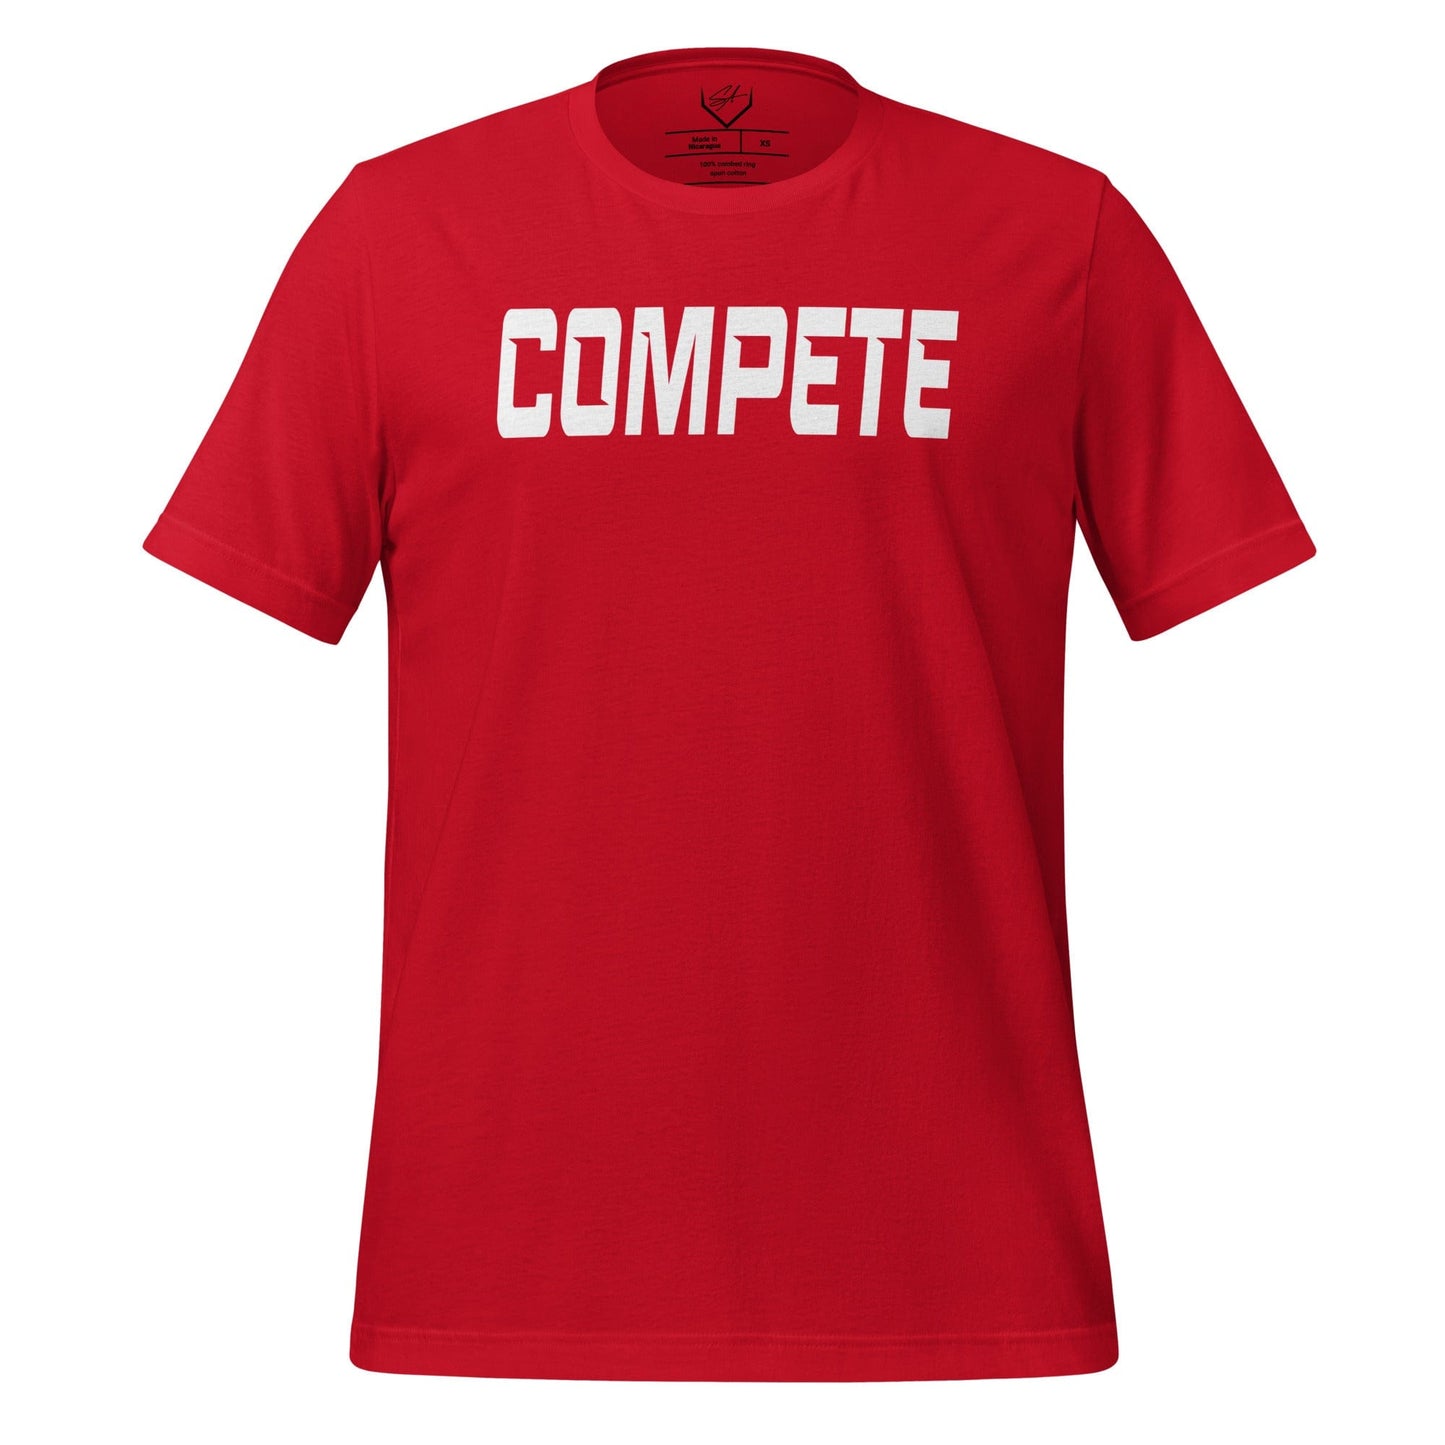 Compete - Adult Tee